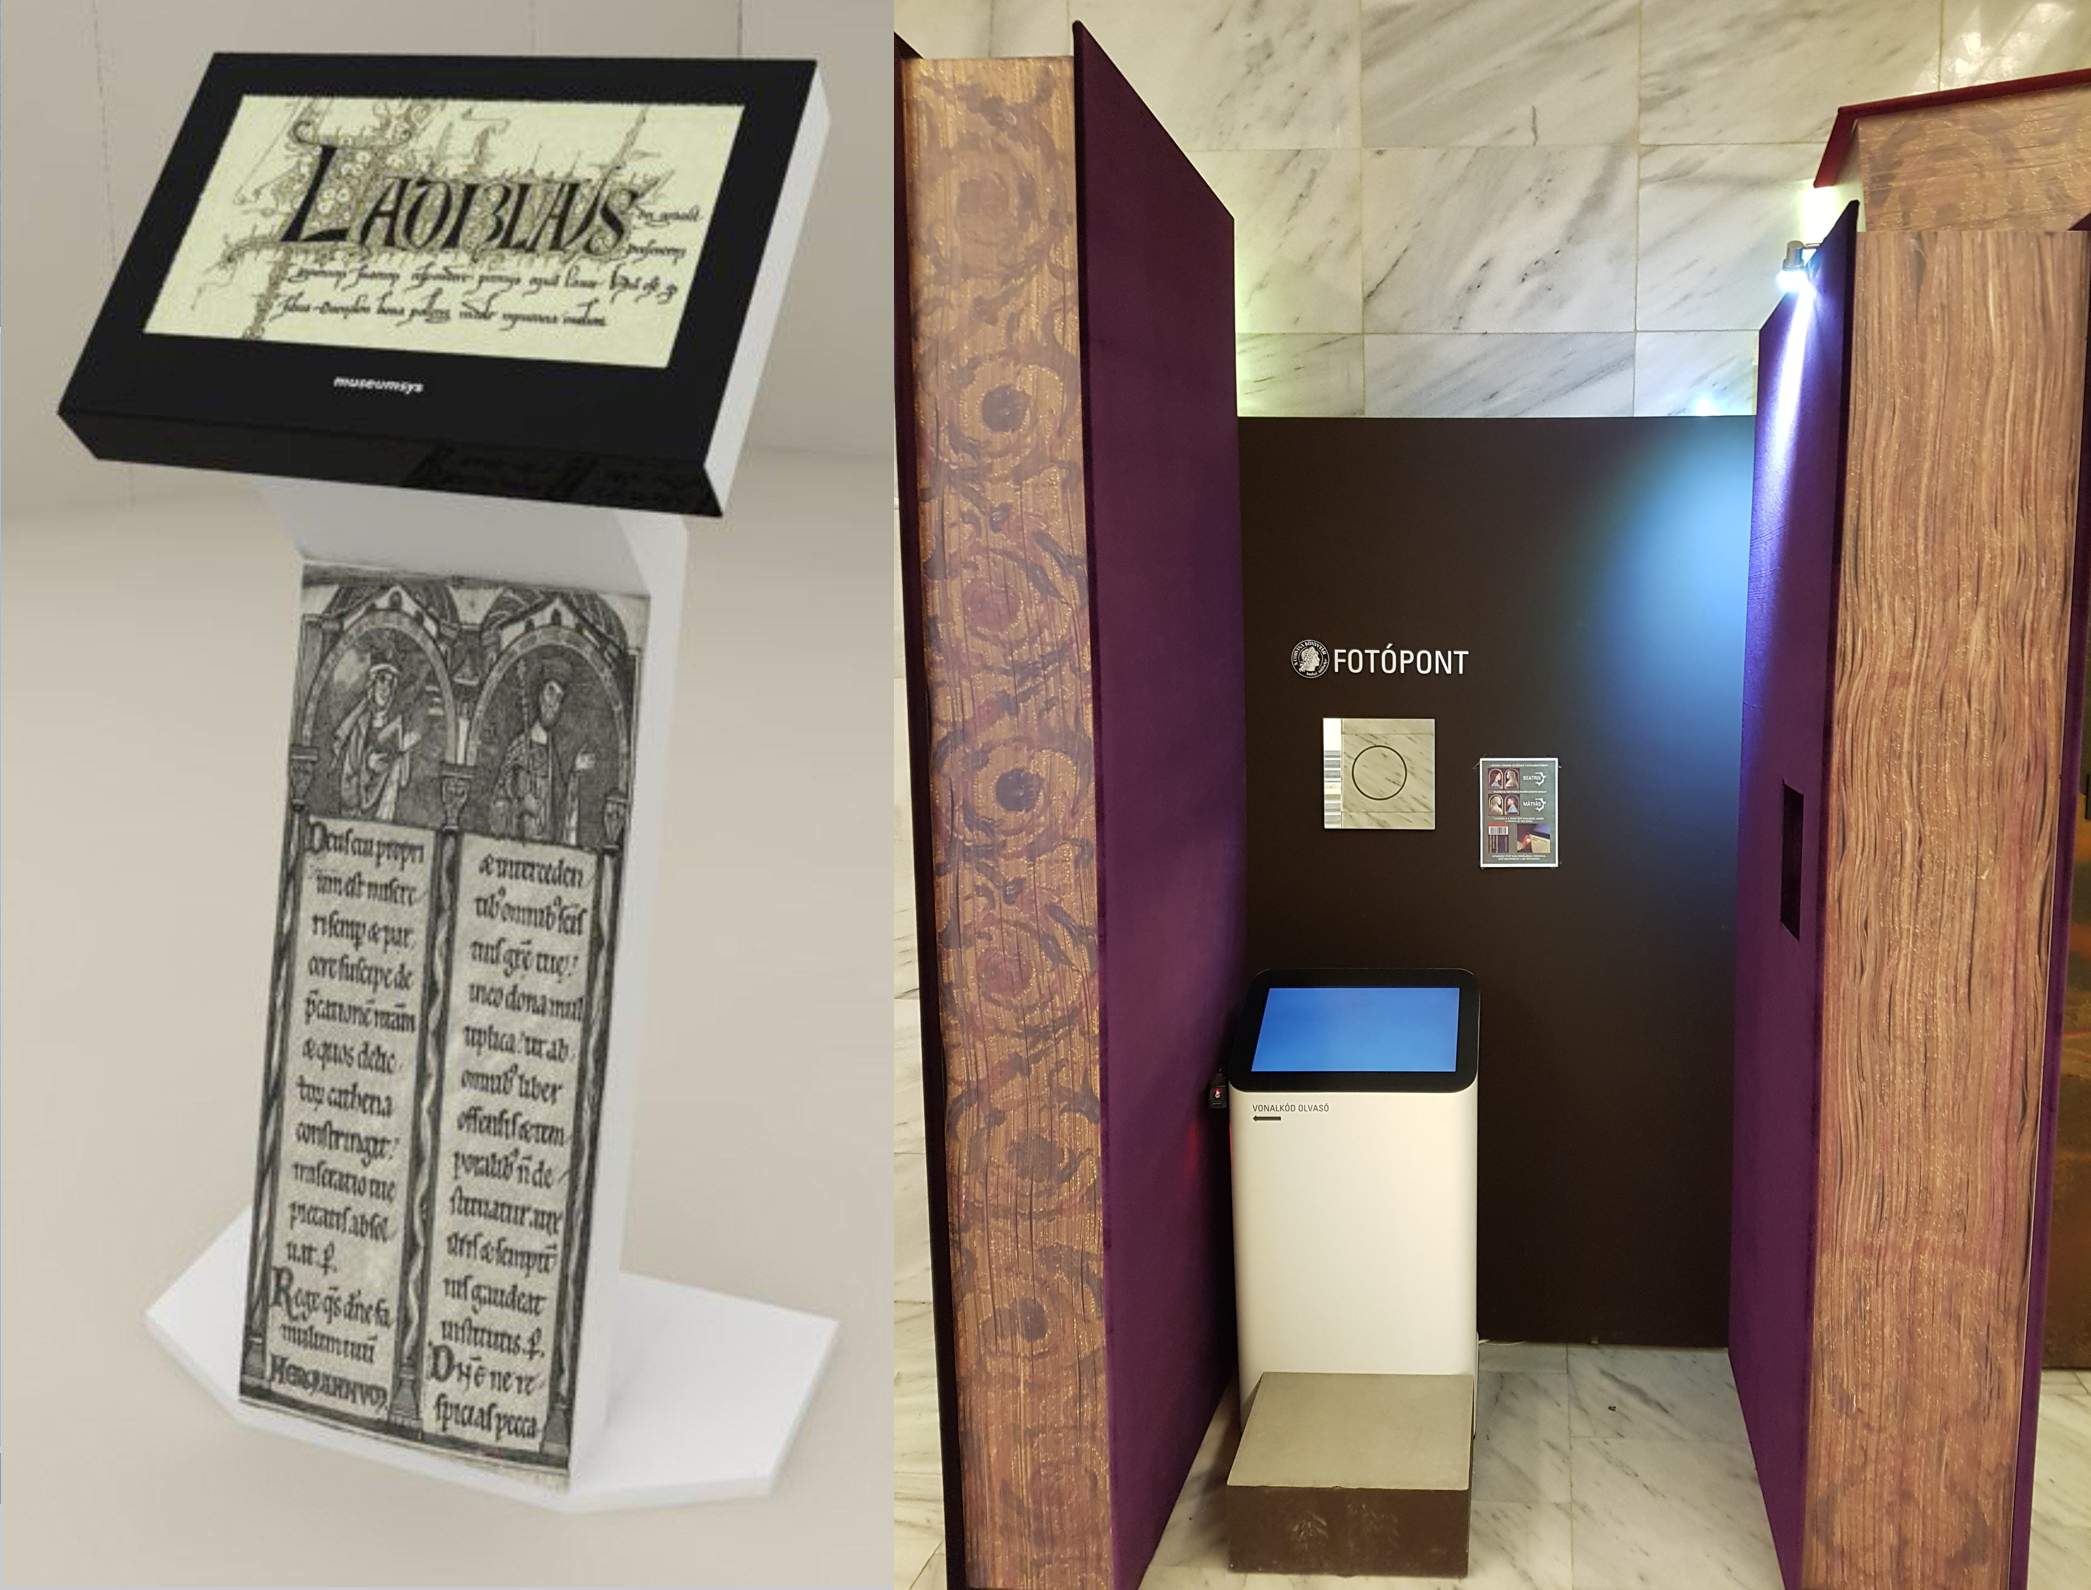 A data sending digital signage terminal and a photoshooting kiosk designed with huge books